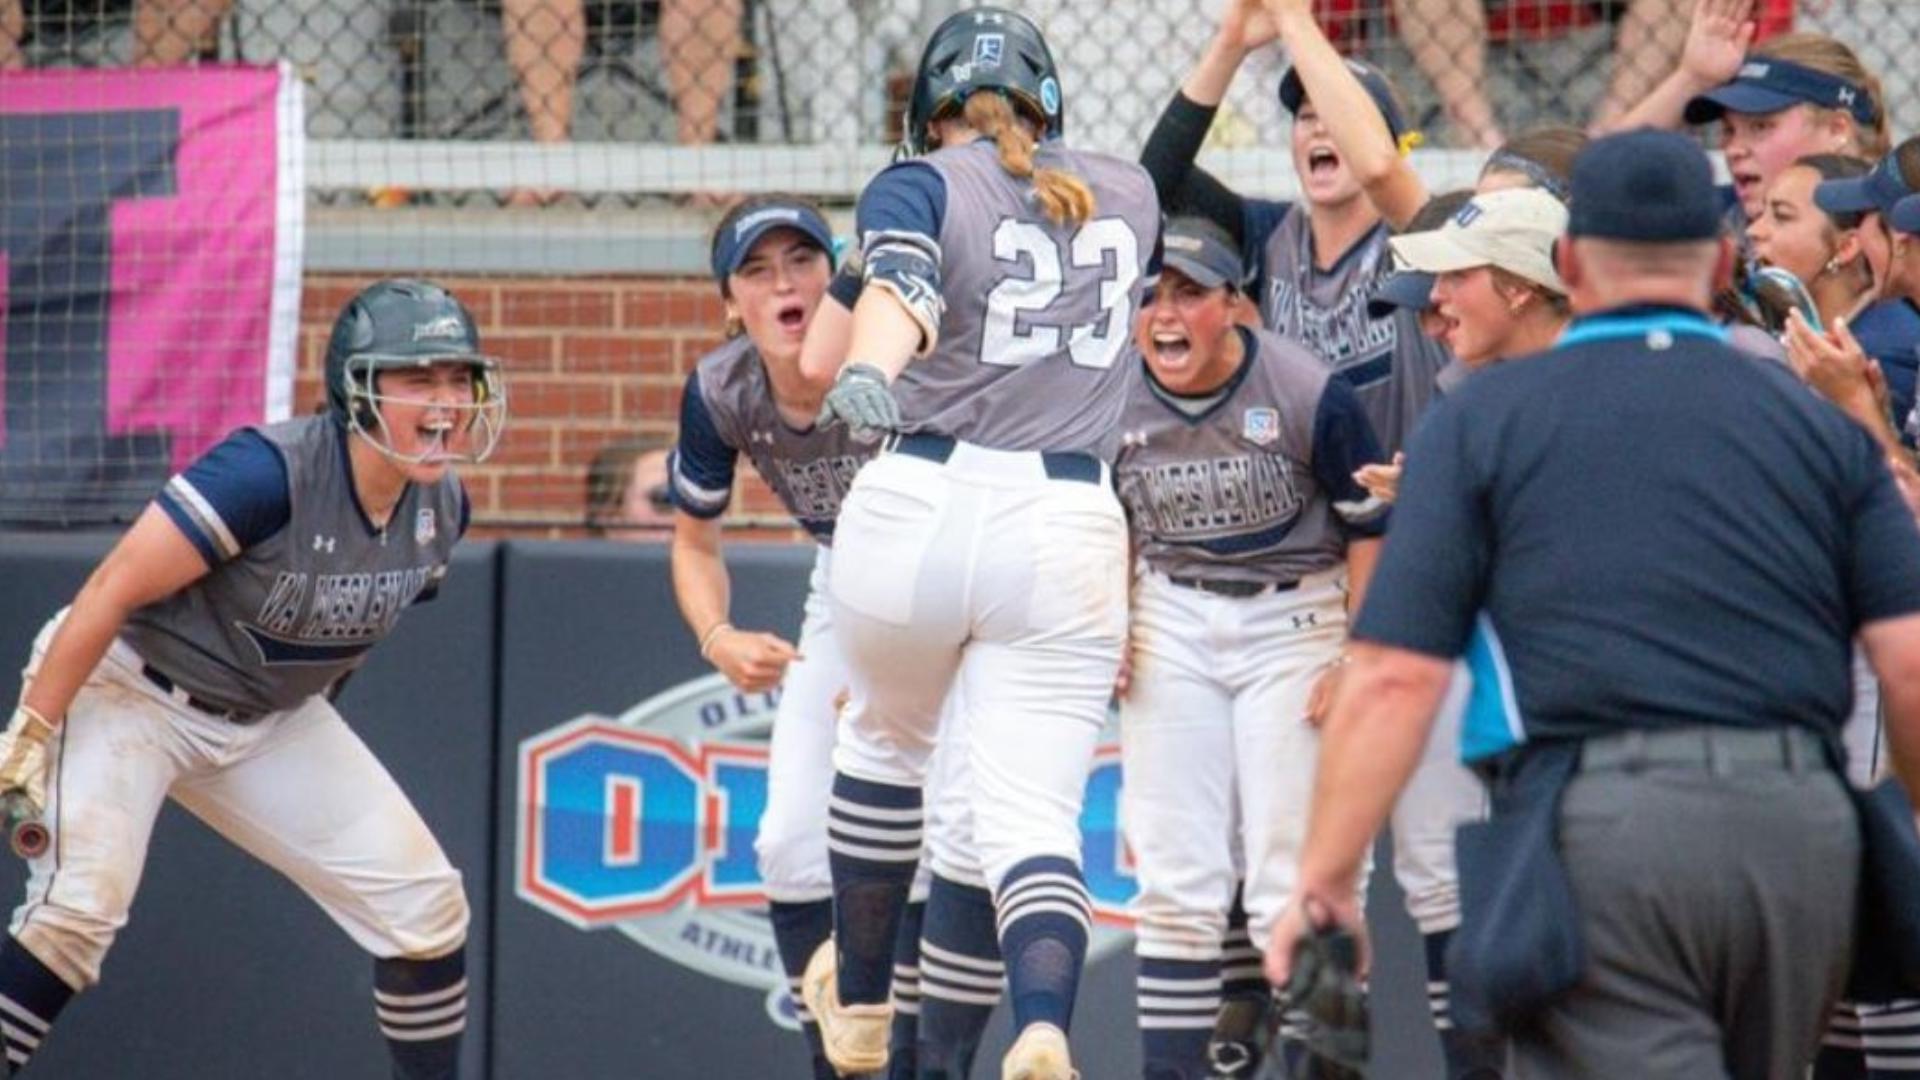 Alison Pollack (23) was 1-for-3 with a solo homer for her second home run of this NCAA playoff run.